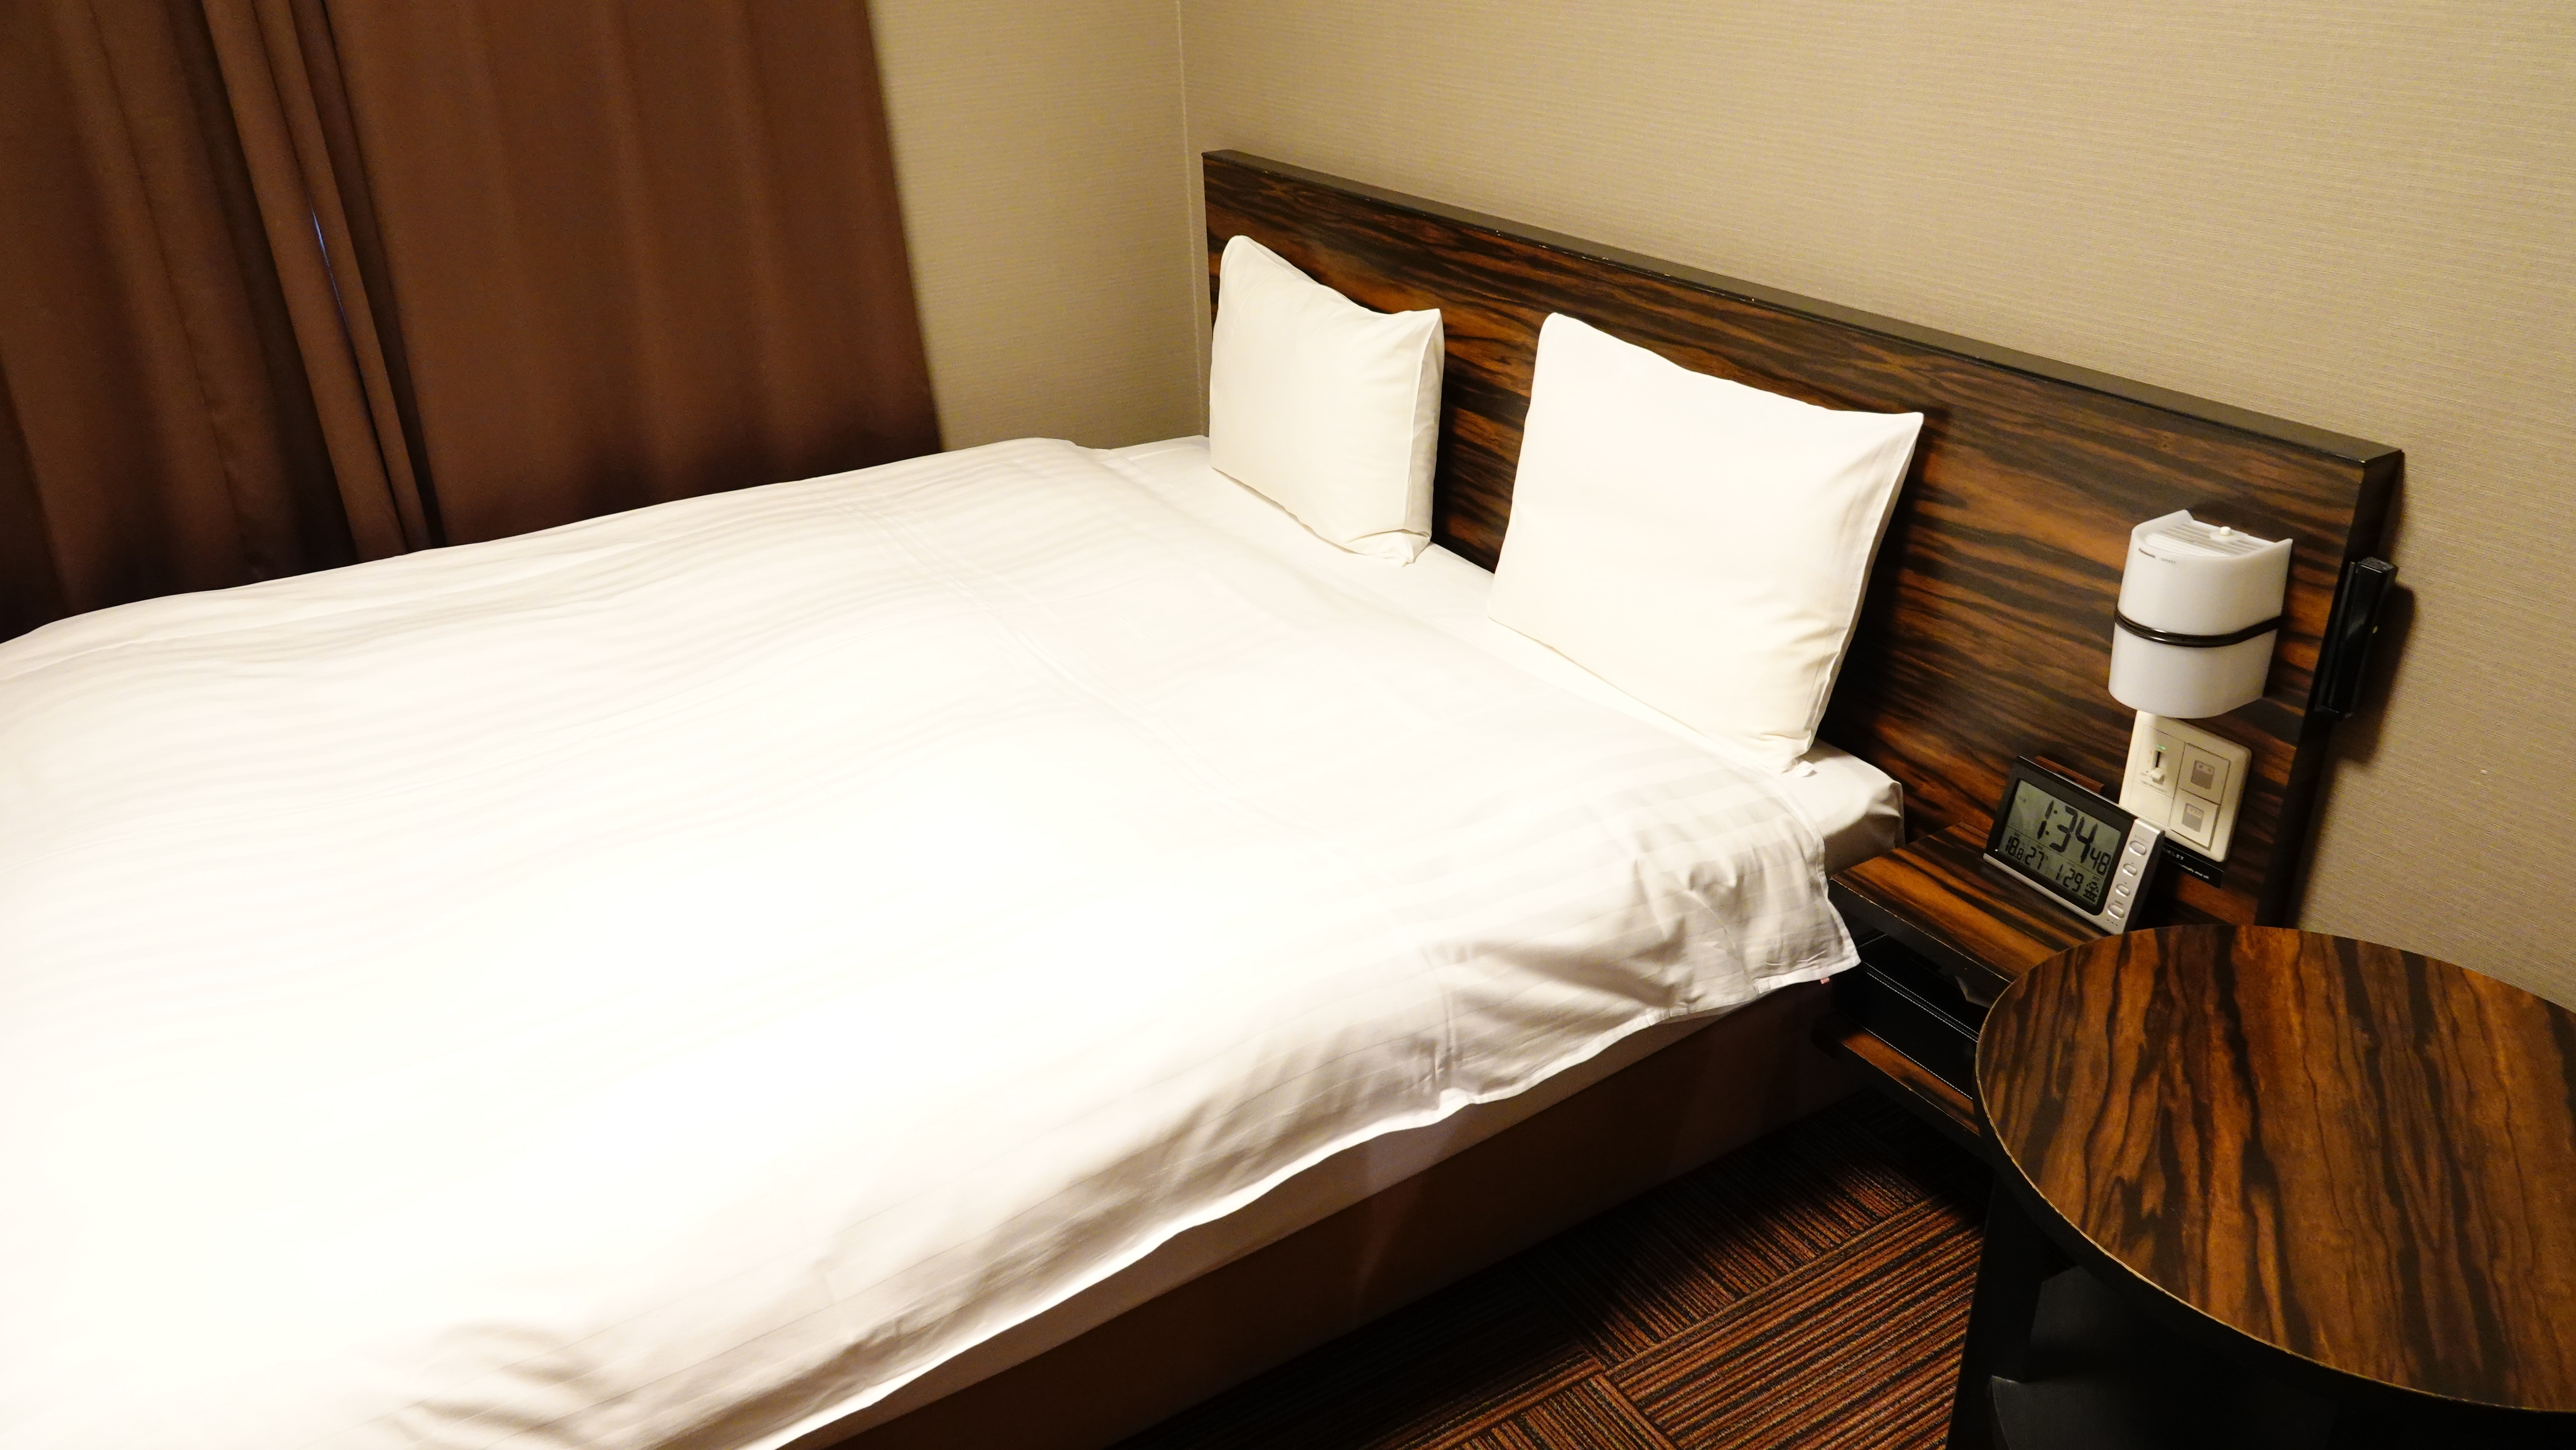 ■ Double room 15.0 square meters (bed width 140cm & times; 195cm) ■